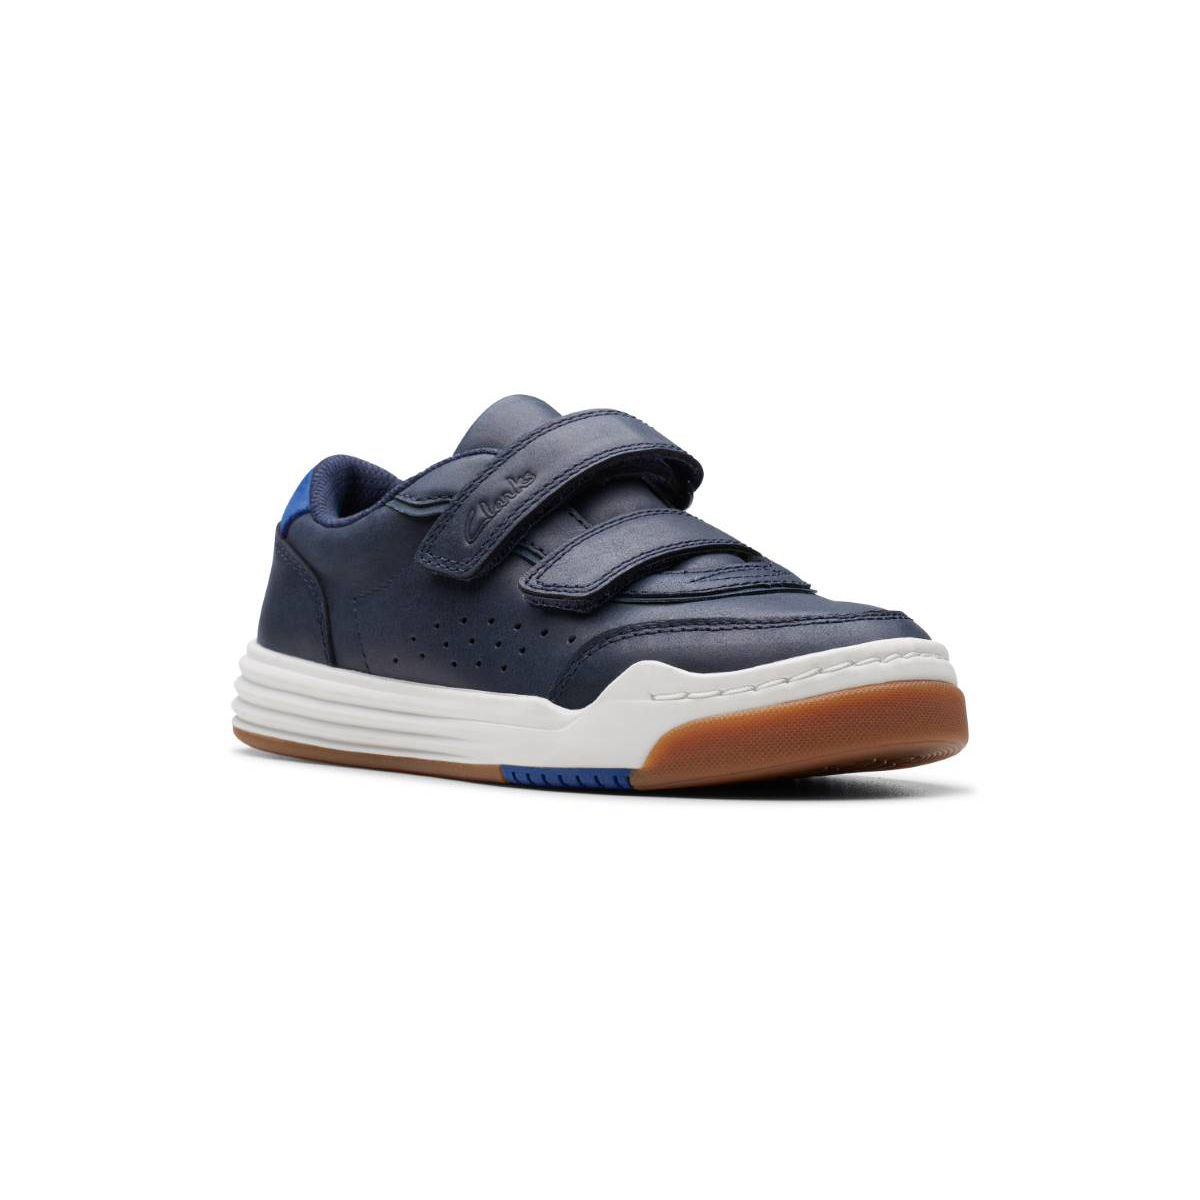 Clarks Urban Solo K Navy Leather Kids Boys Toddler Shoes 7666-07G in a Plain Leather in Size 8.5